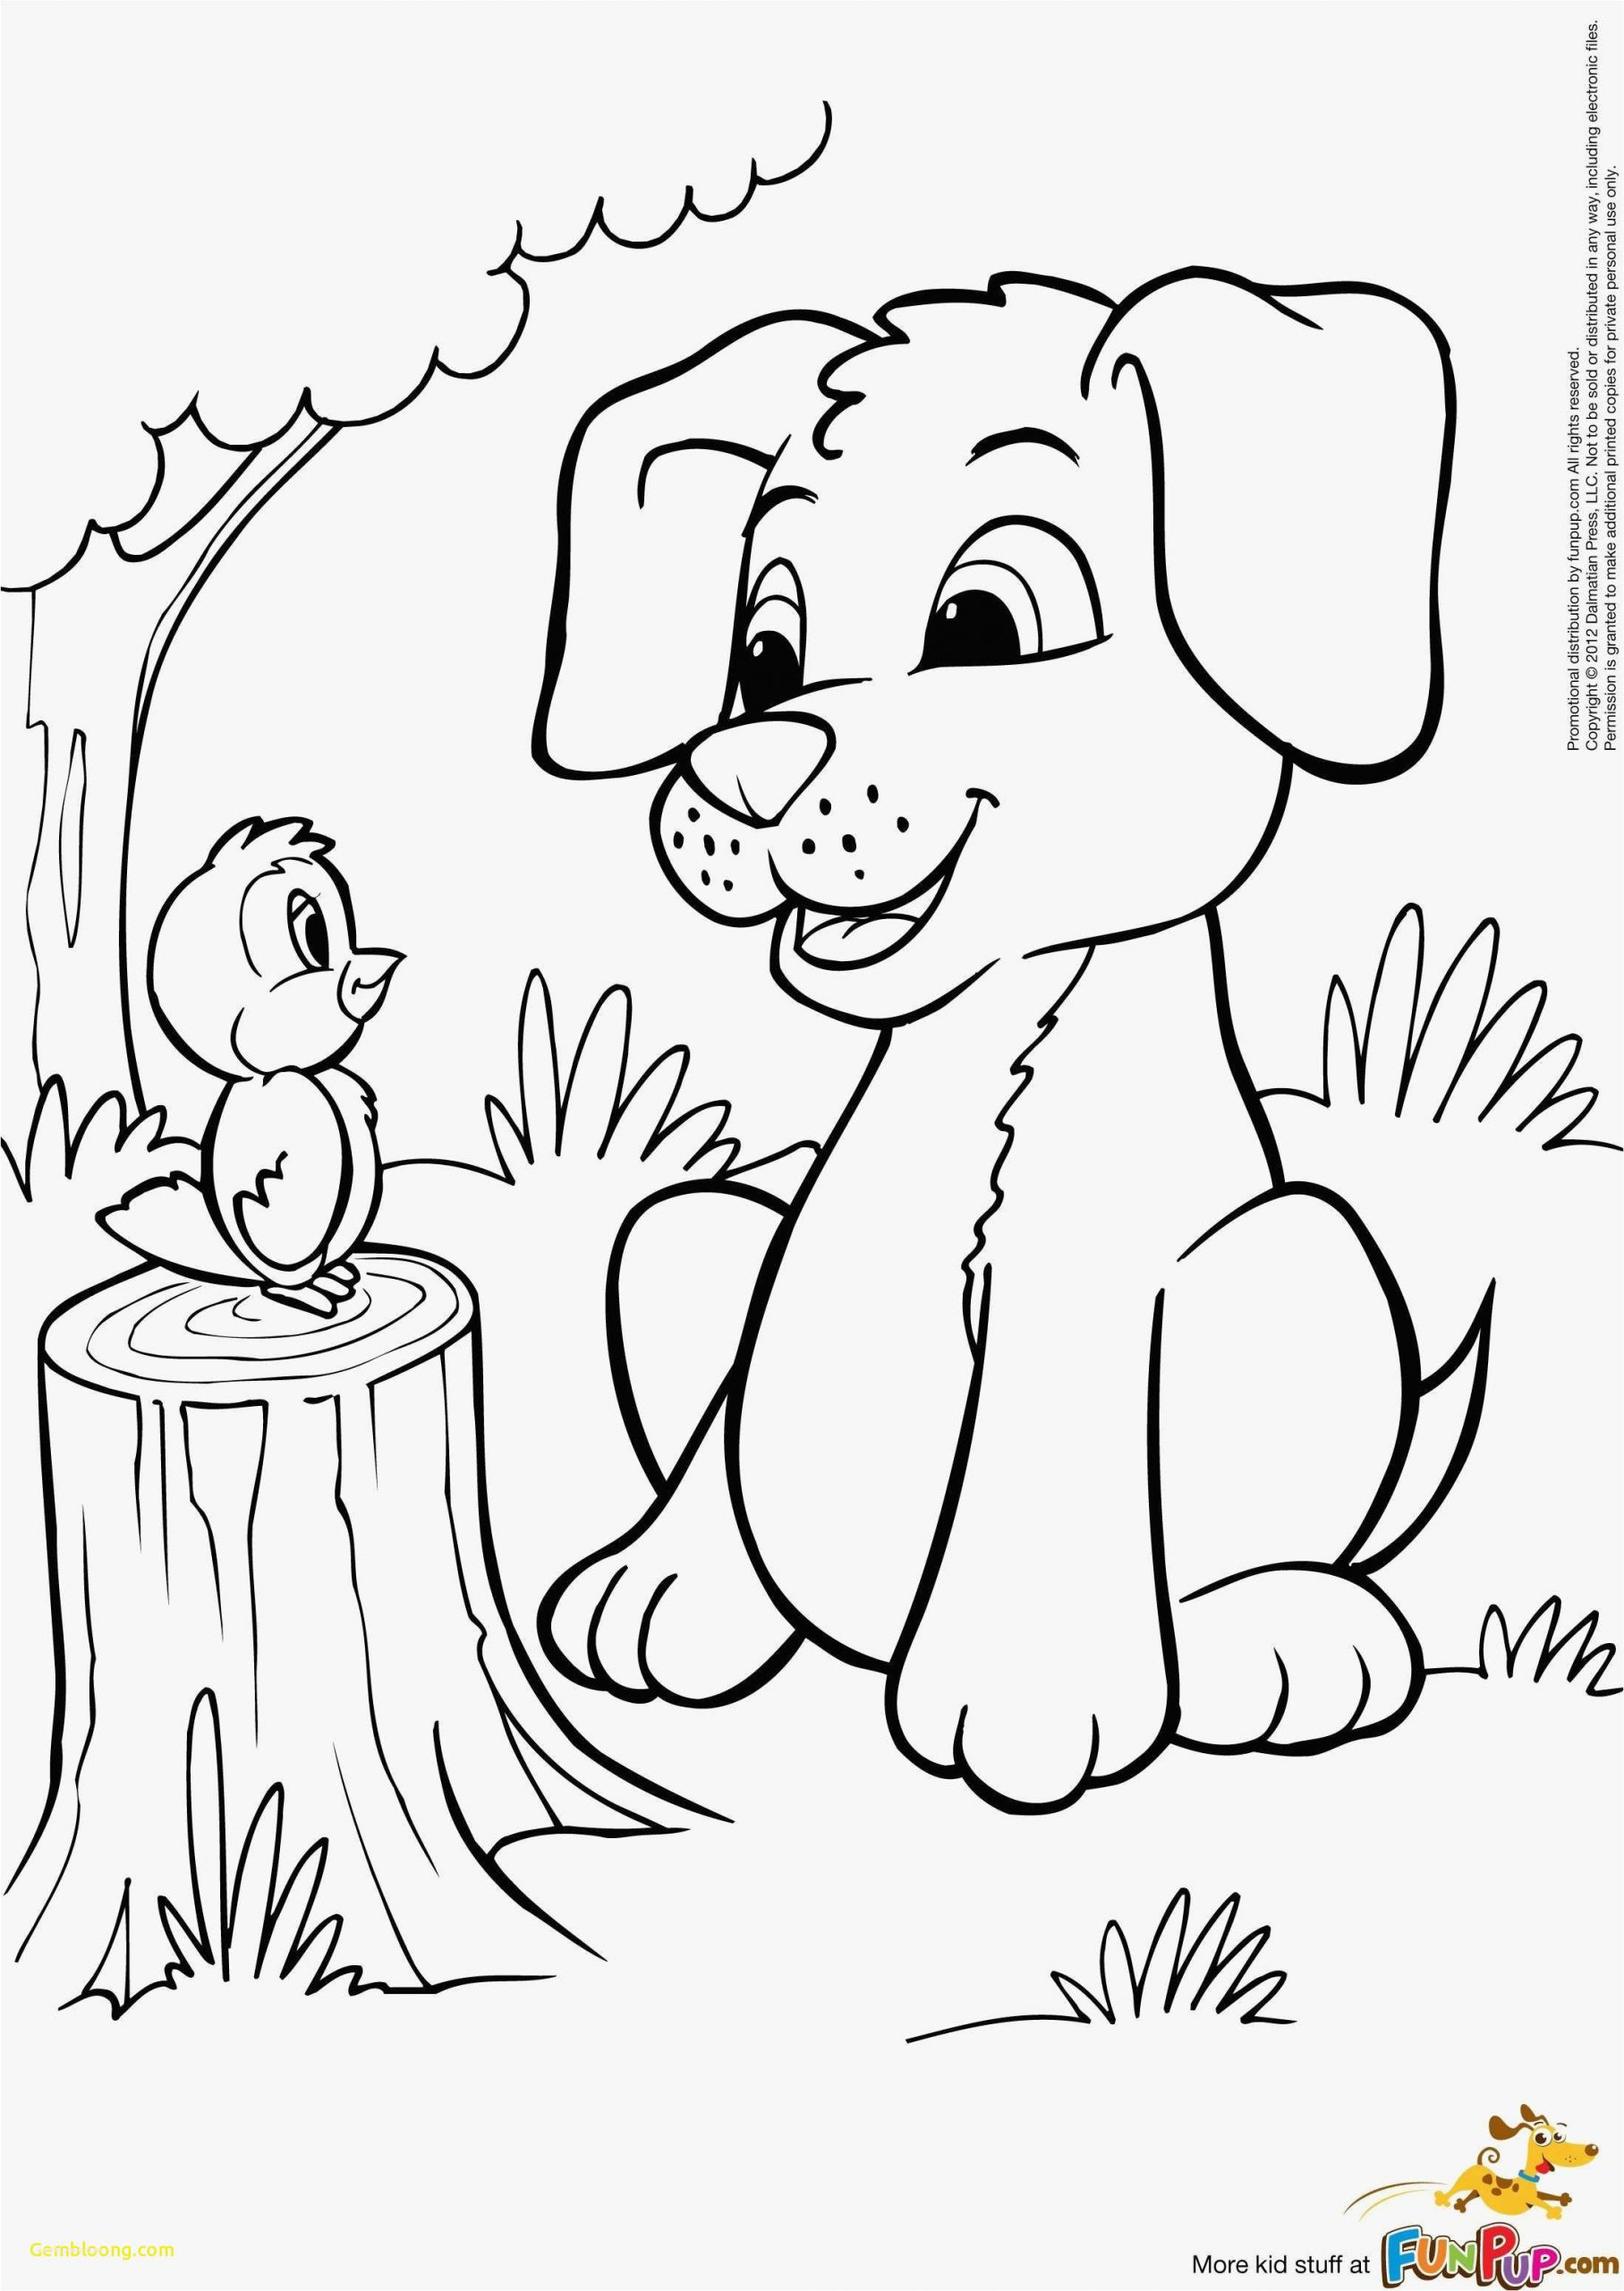 coloring pages : Coloring Images For Kids Awesome Coloring Pages Printable  Coloring For Kids Lovely 10 Coloring Images for Kids ~ peak